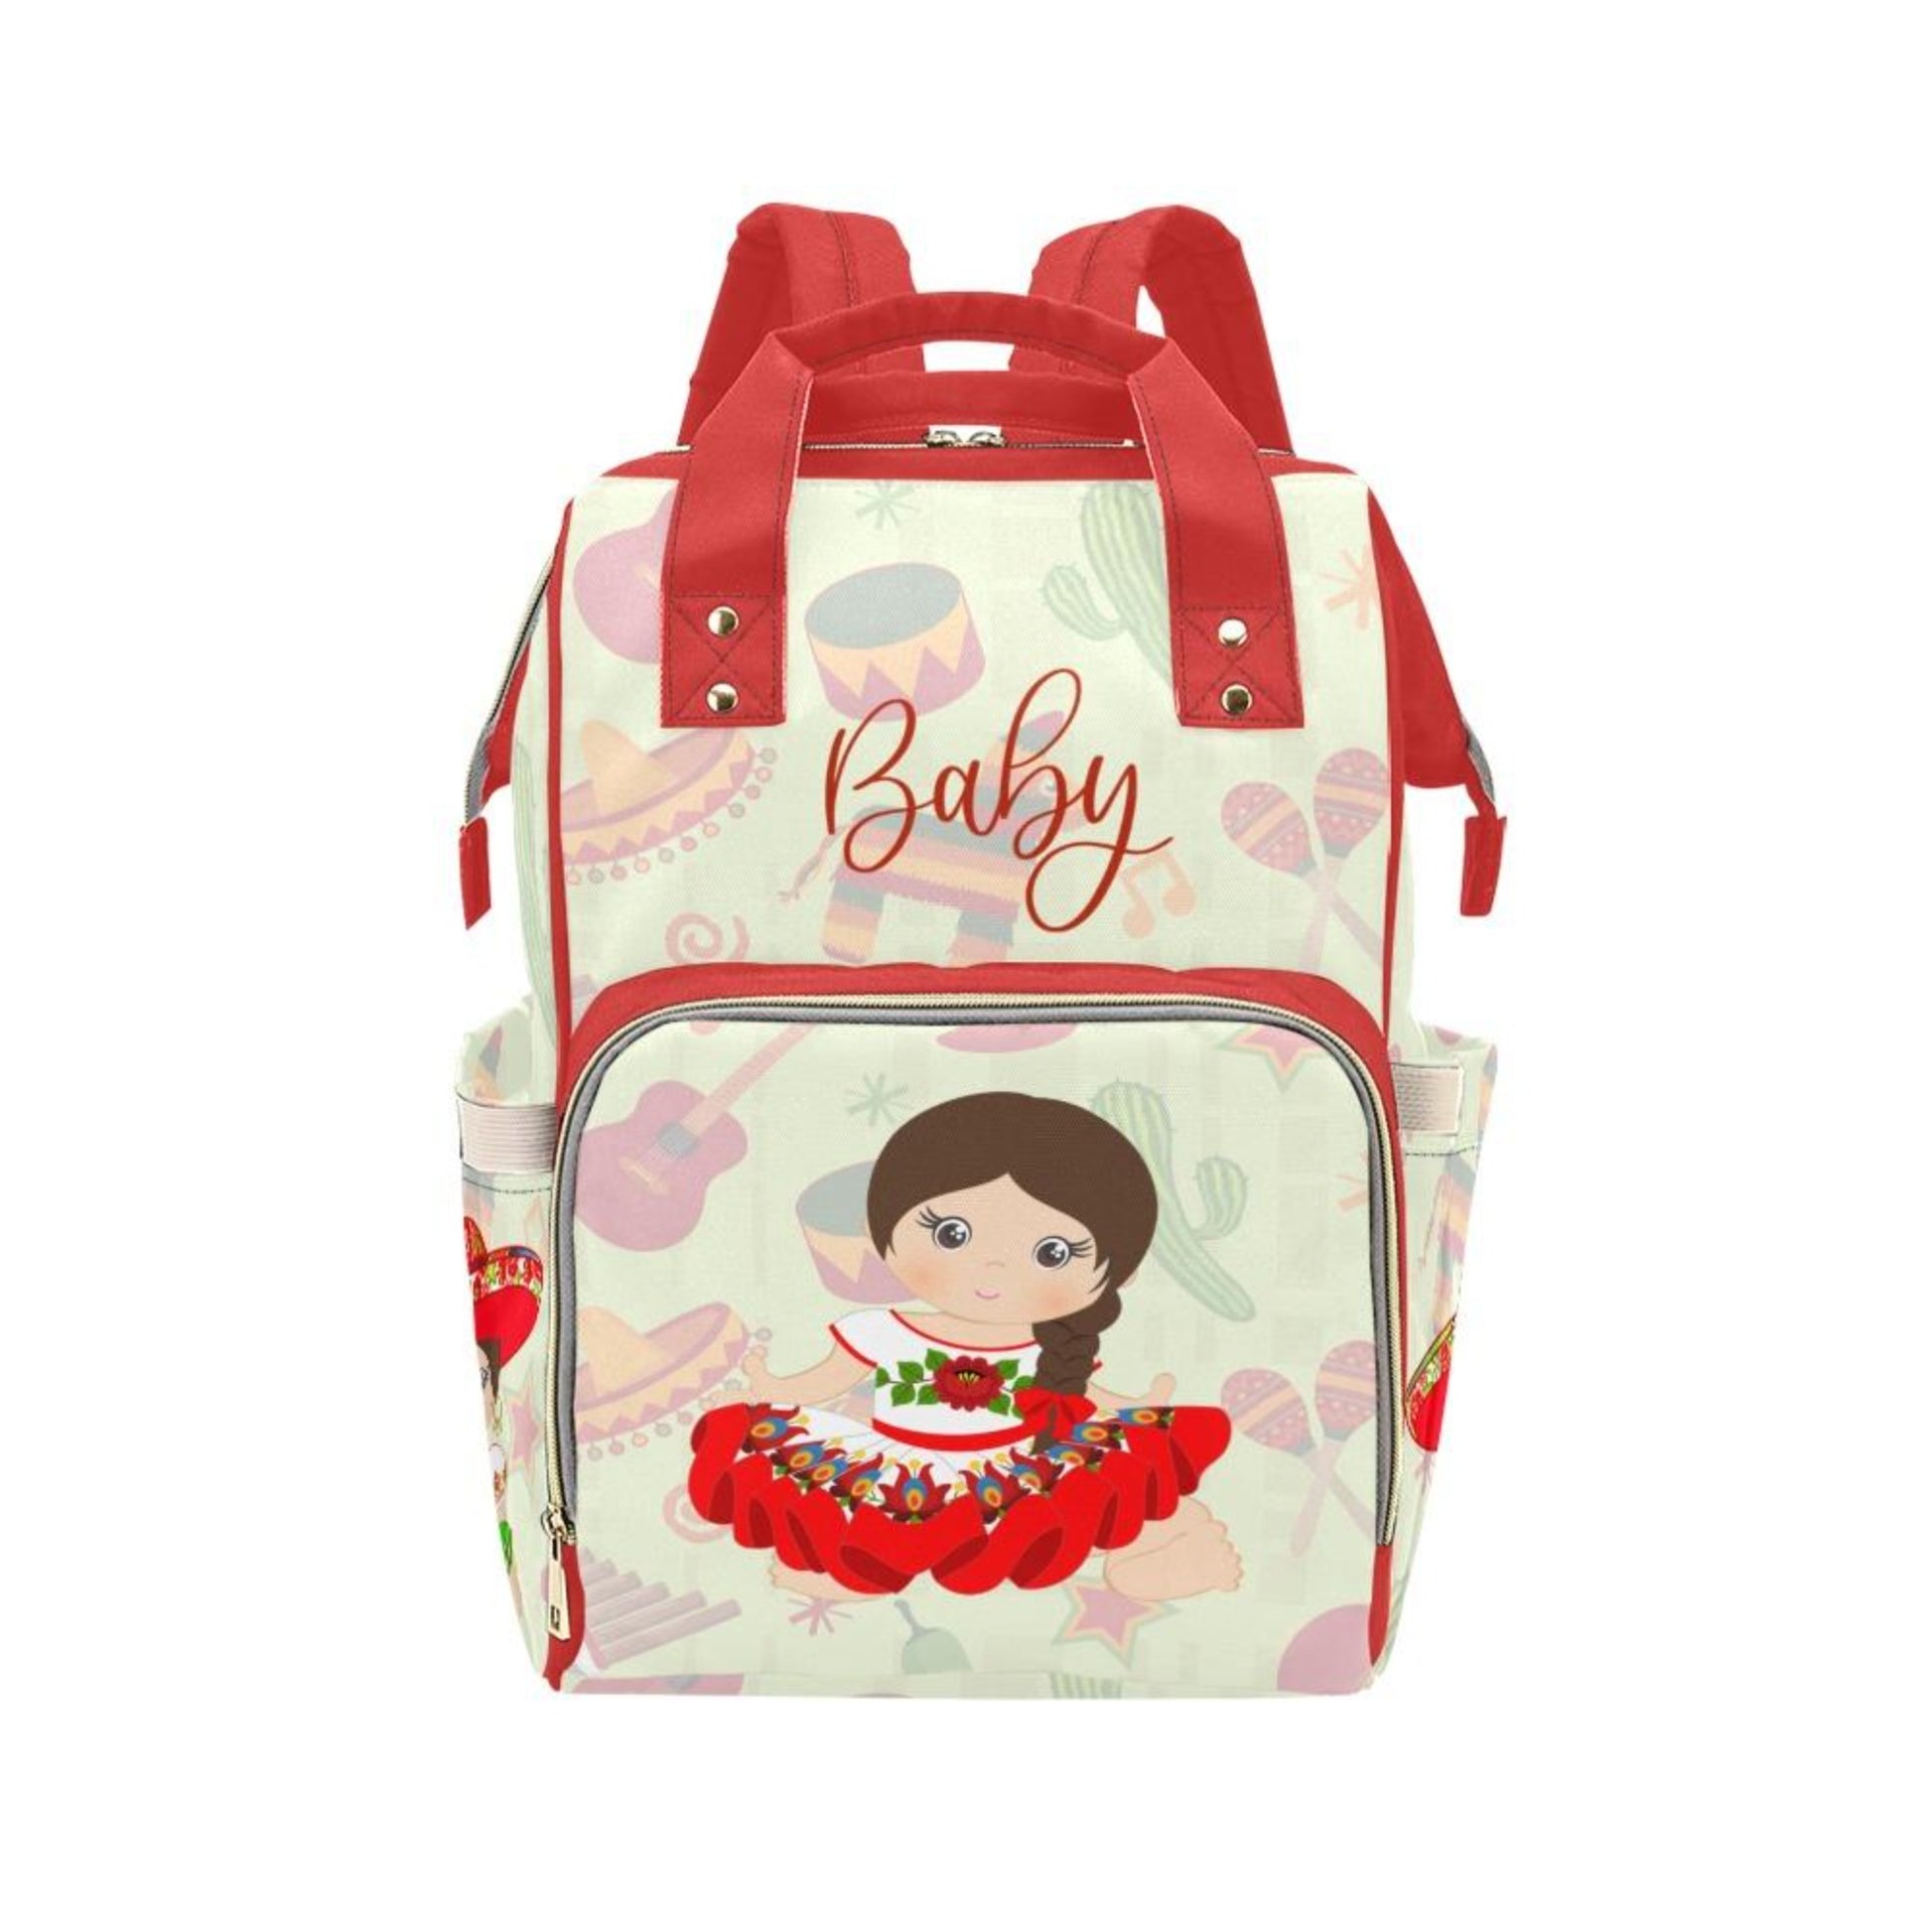 Designer Diaper Bags - Latina American Baby Girl - Red Accents - Water